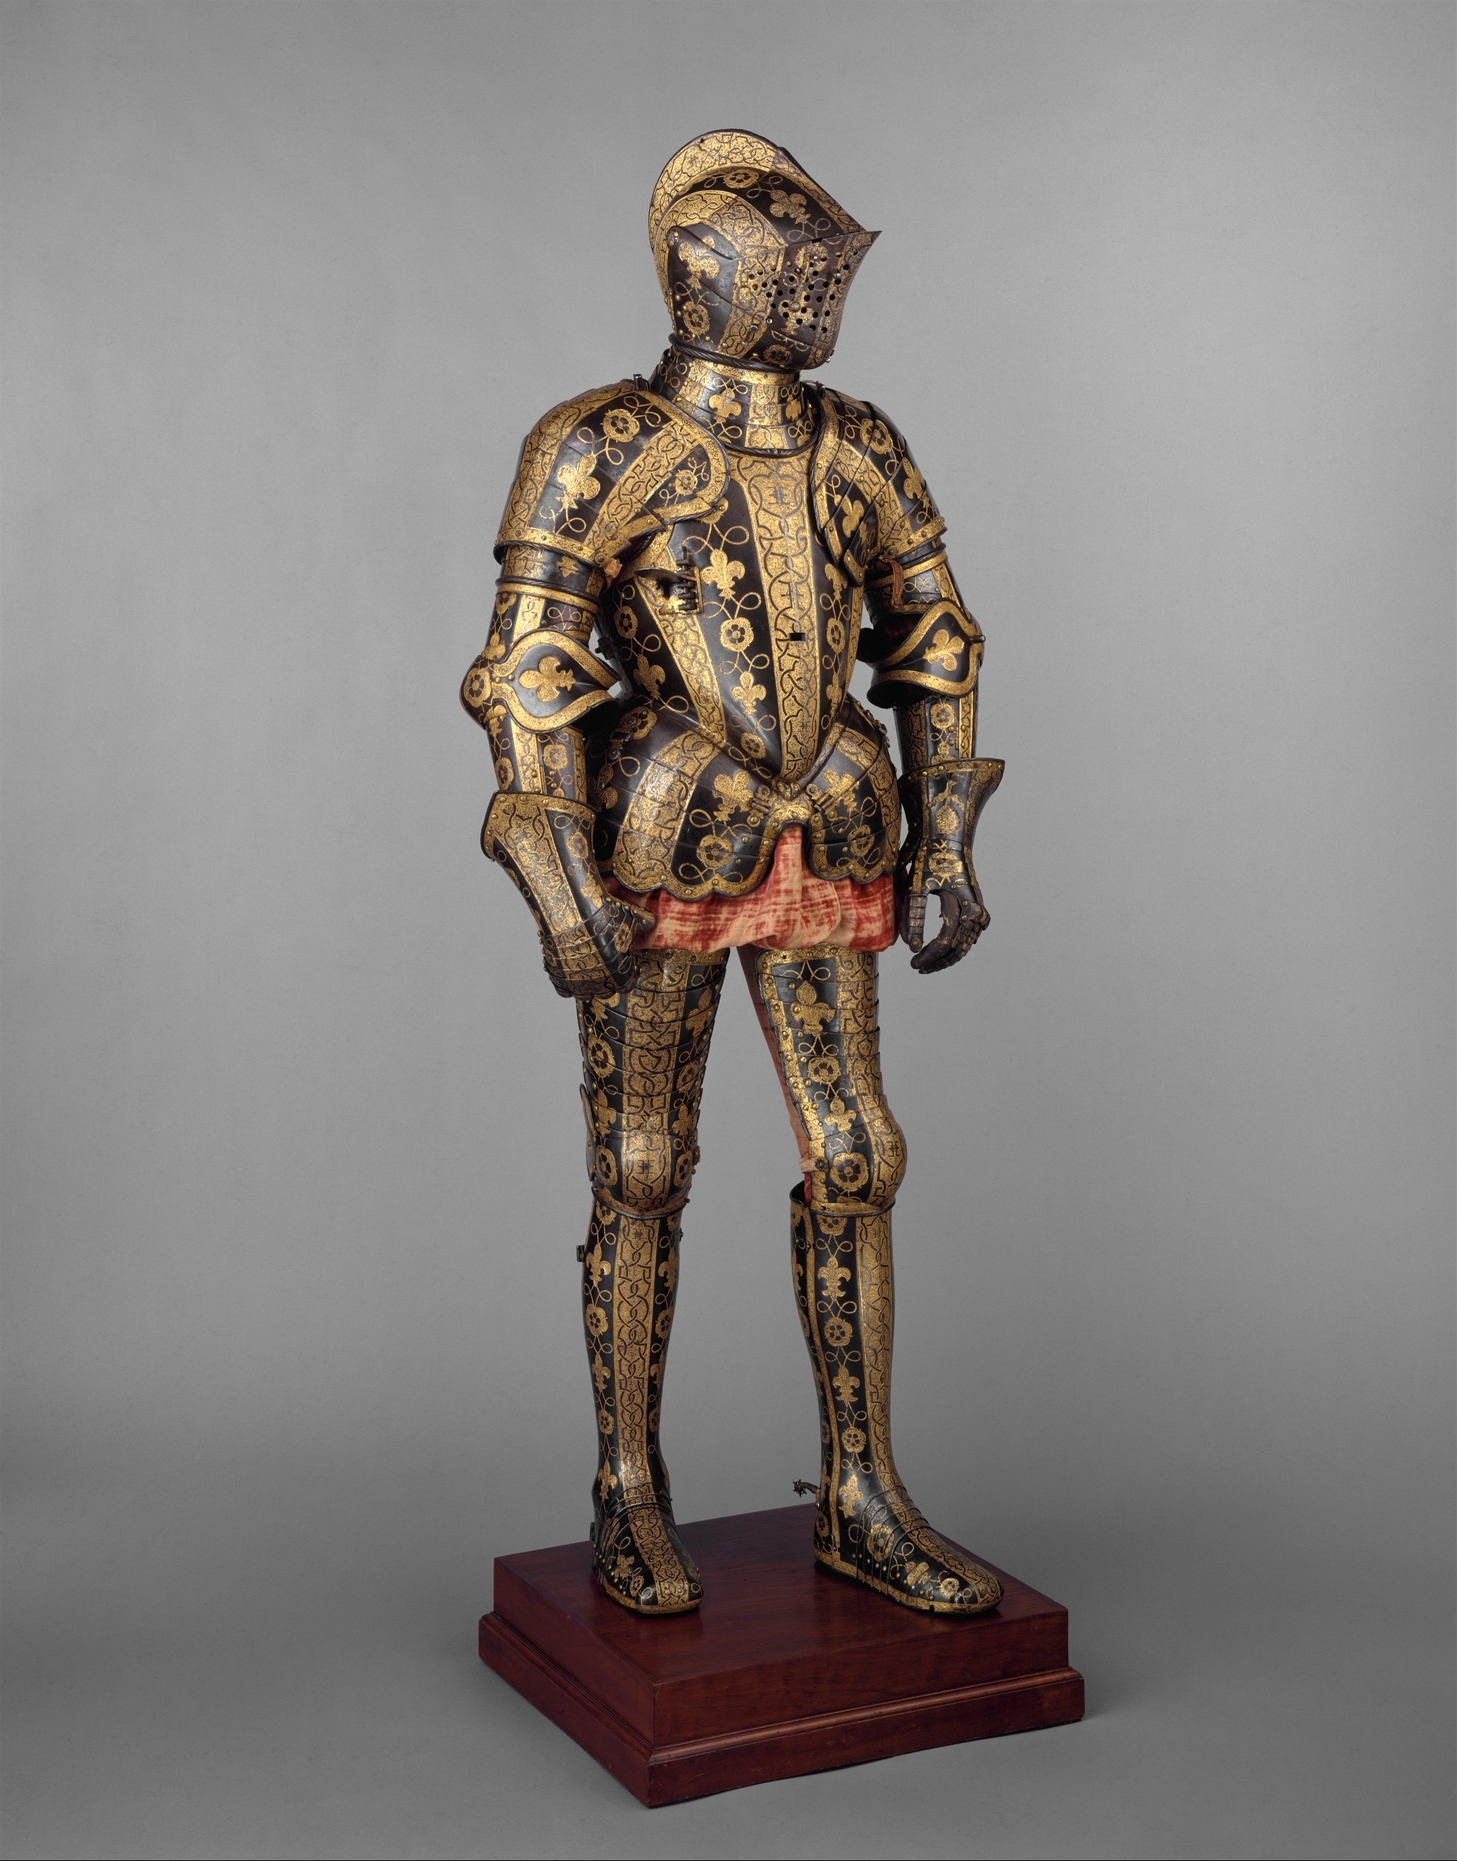 Knight armor set of George Clifford, middle of the 16th century